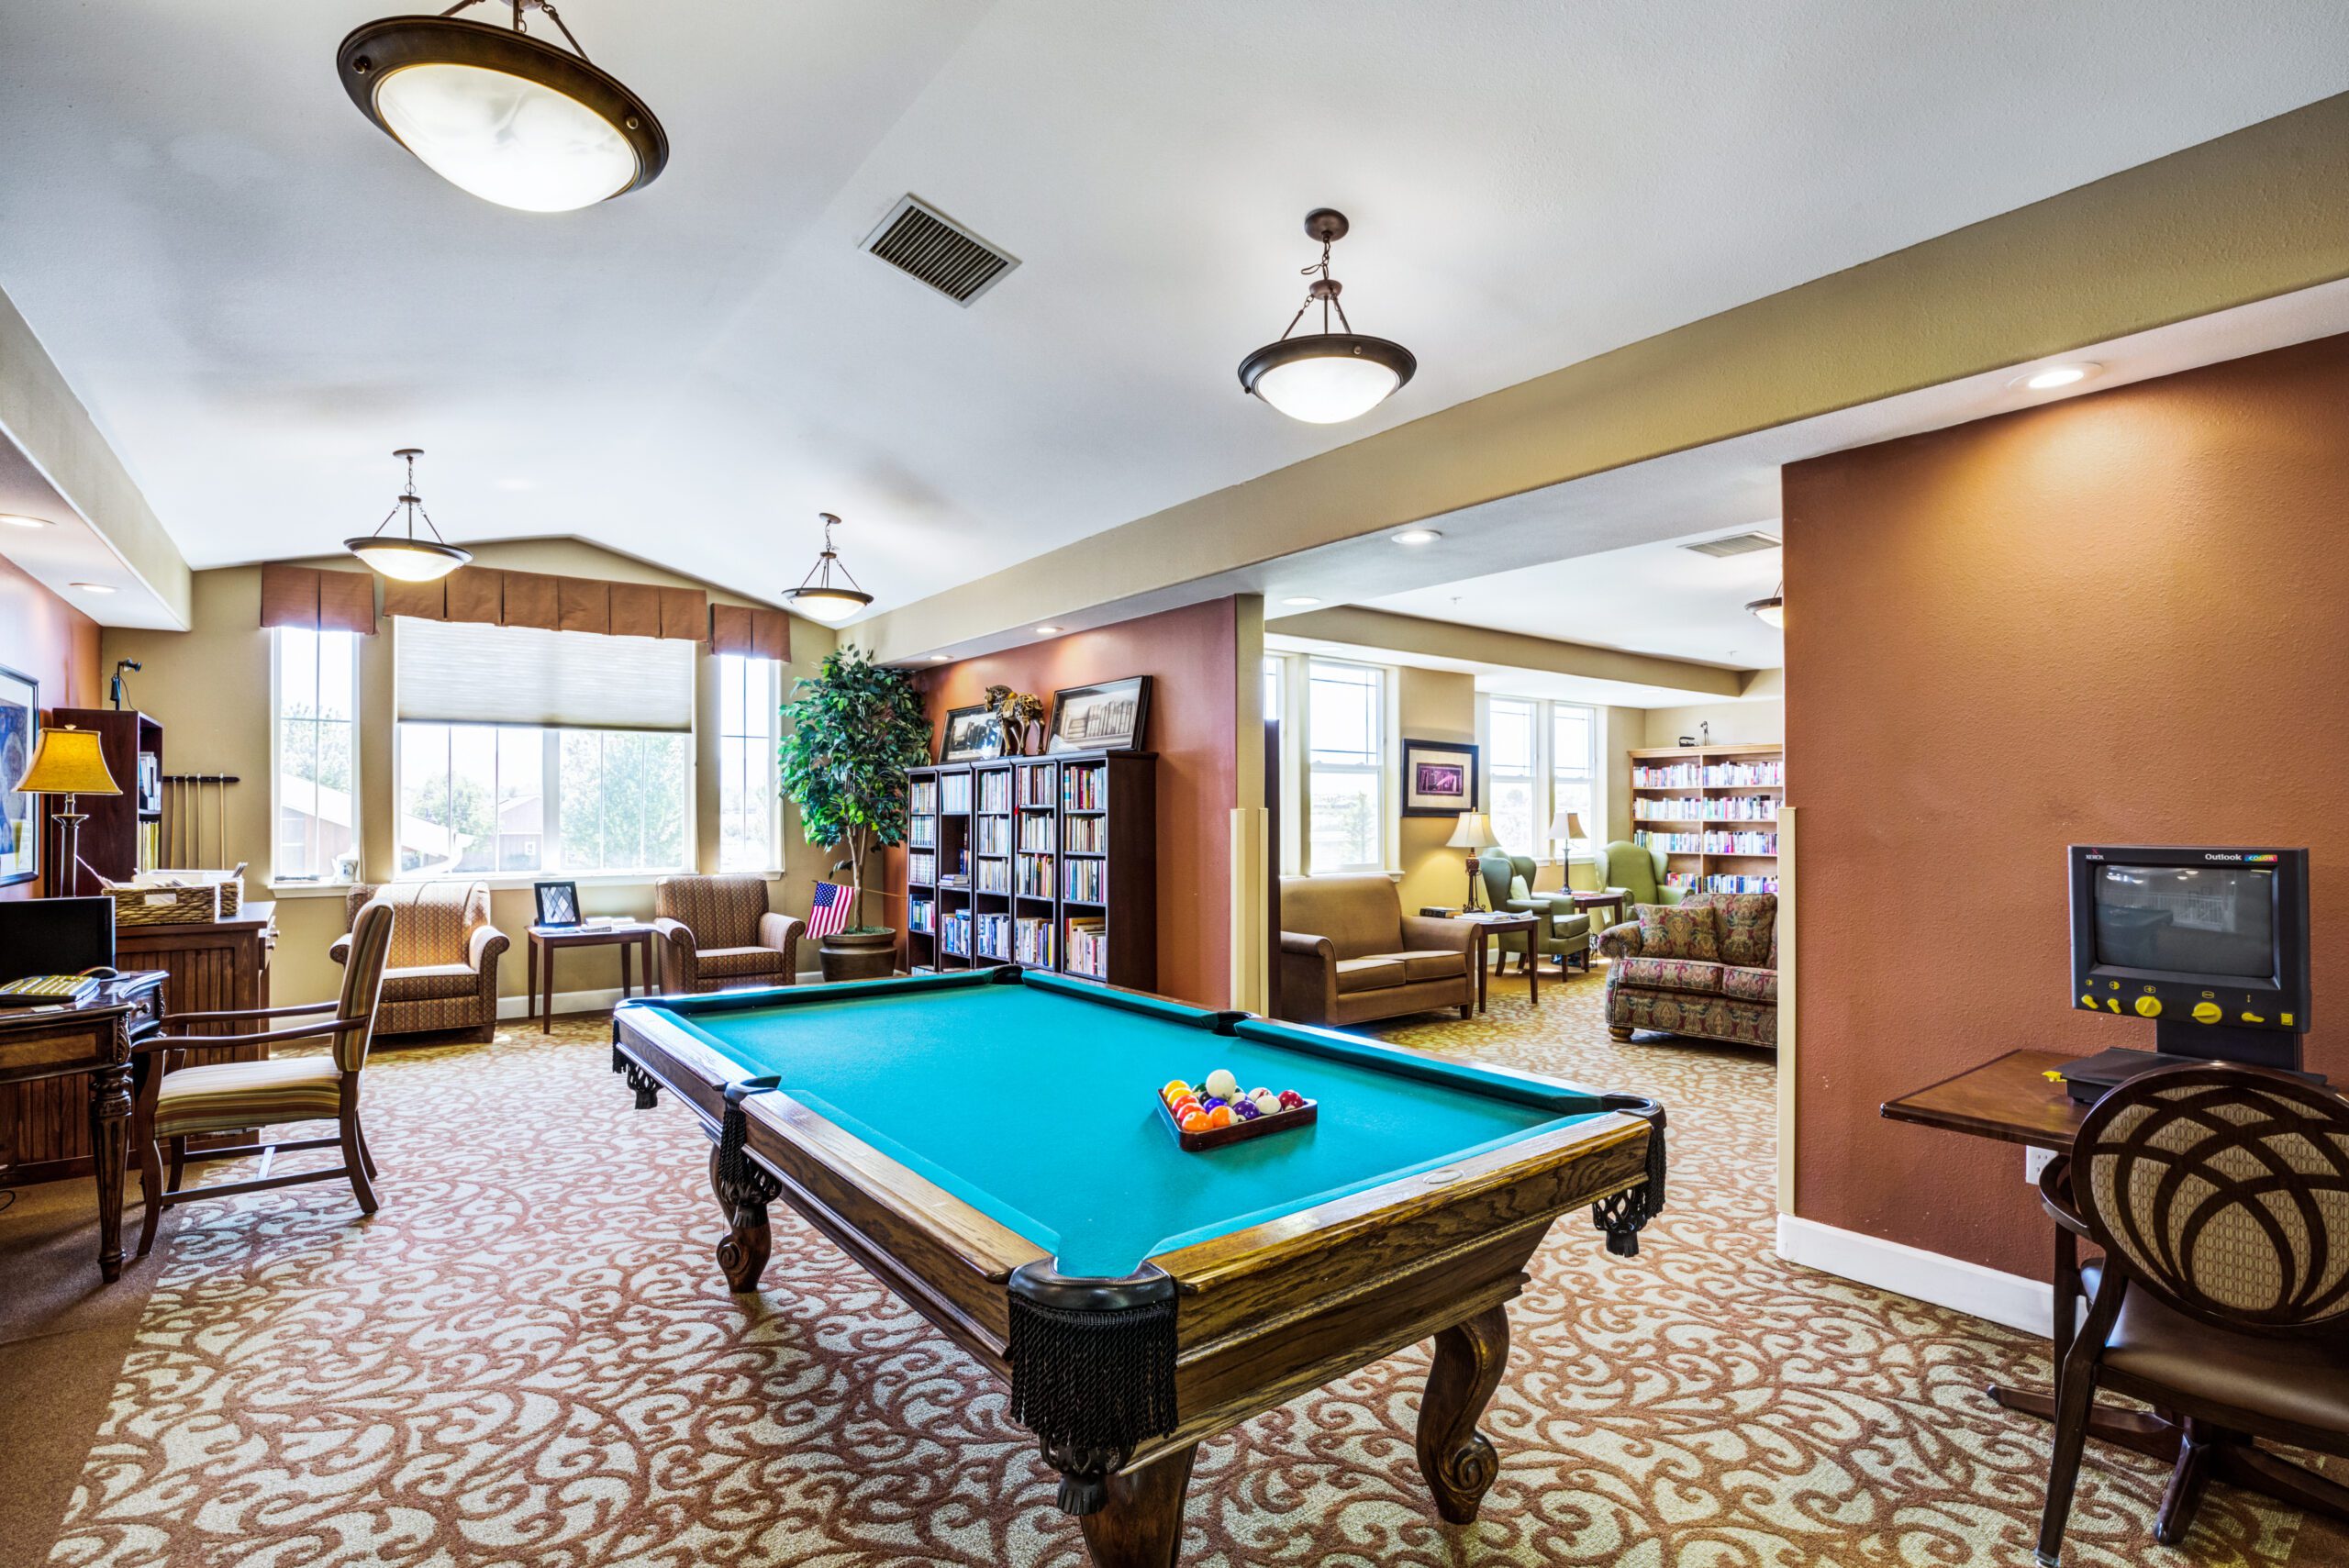 Senior living play room with billiards